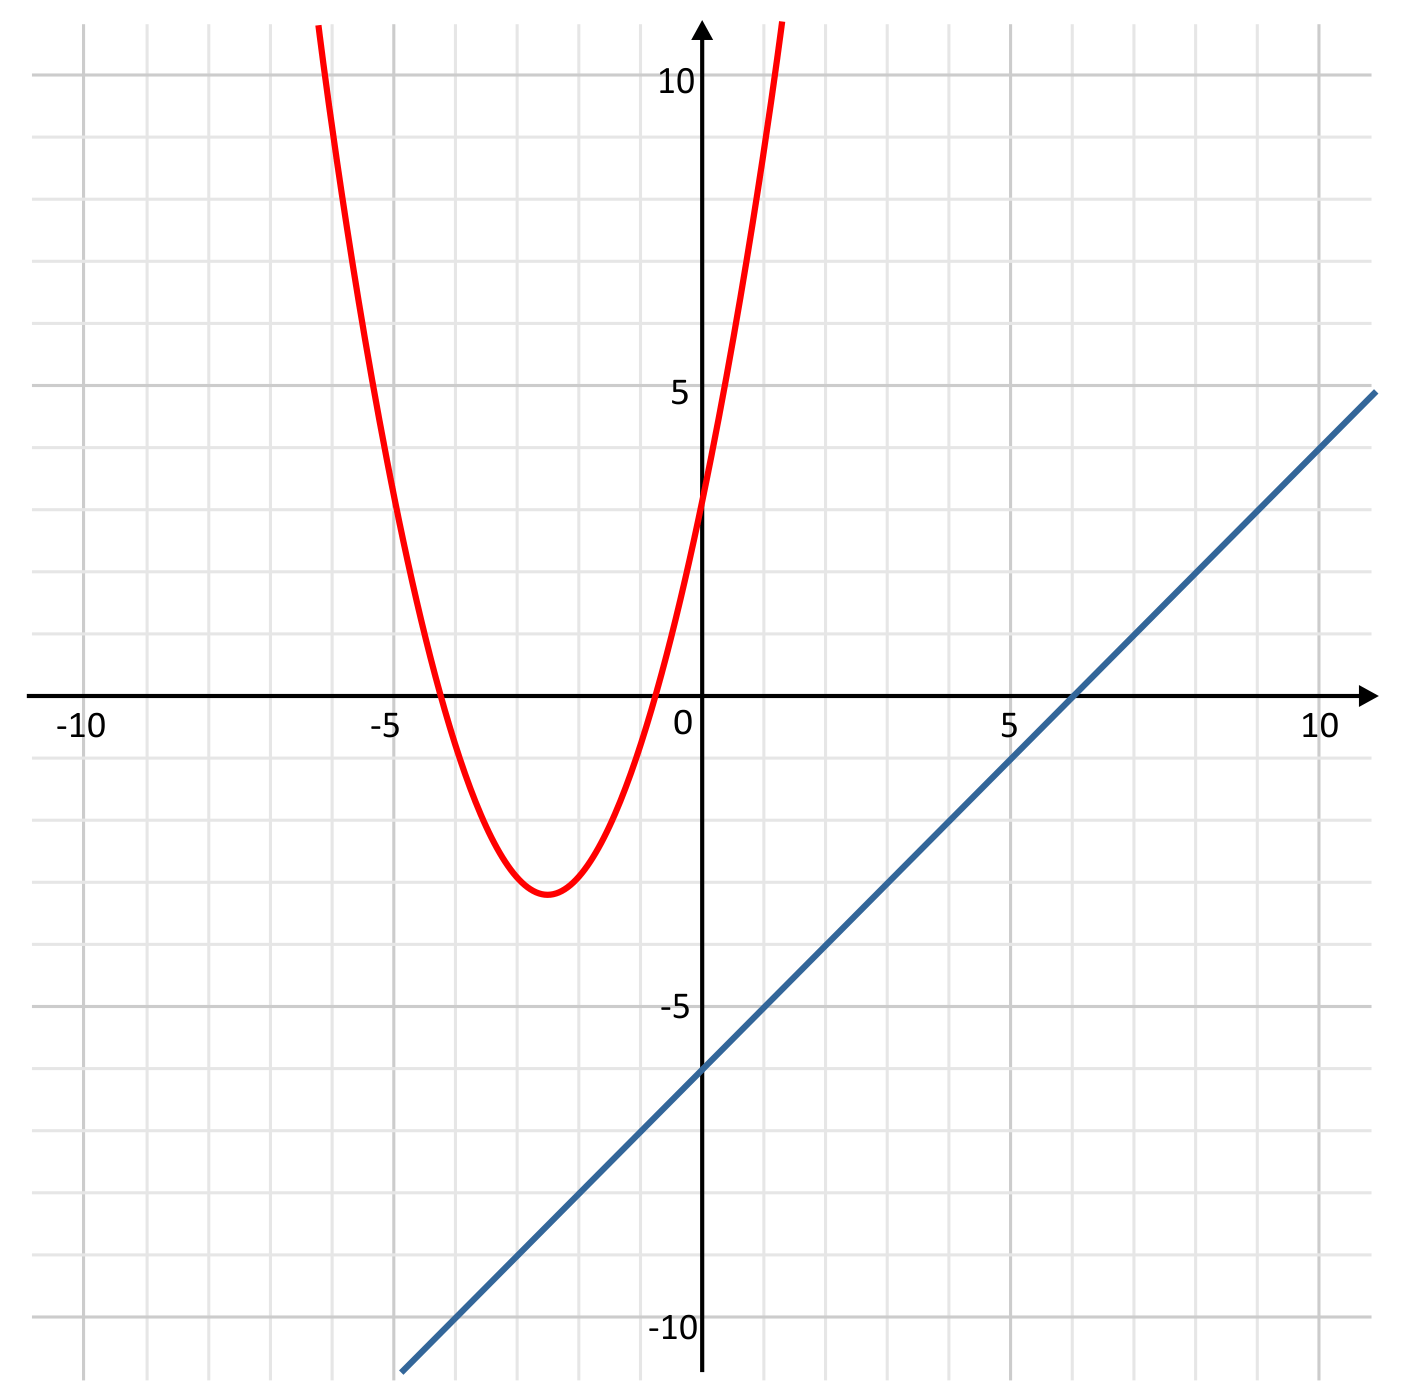 parabola and linear line that do not intersect